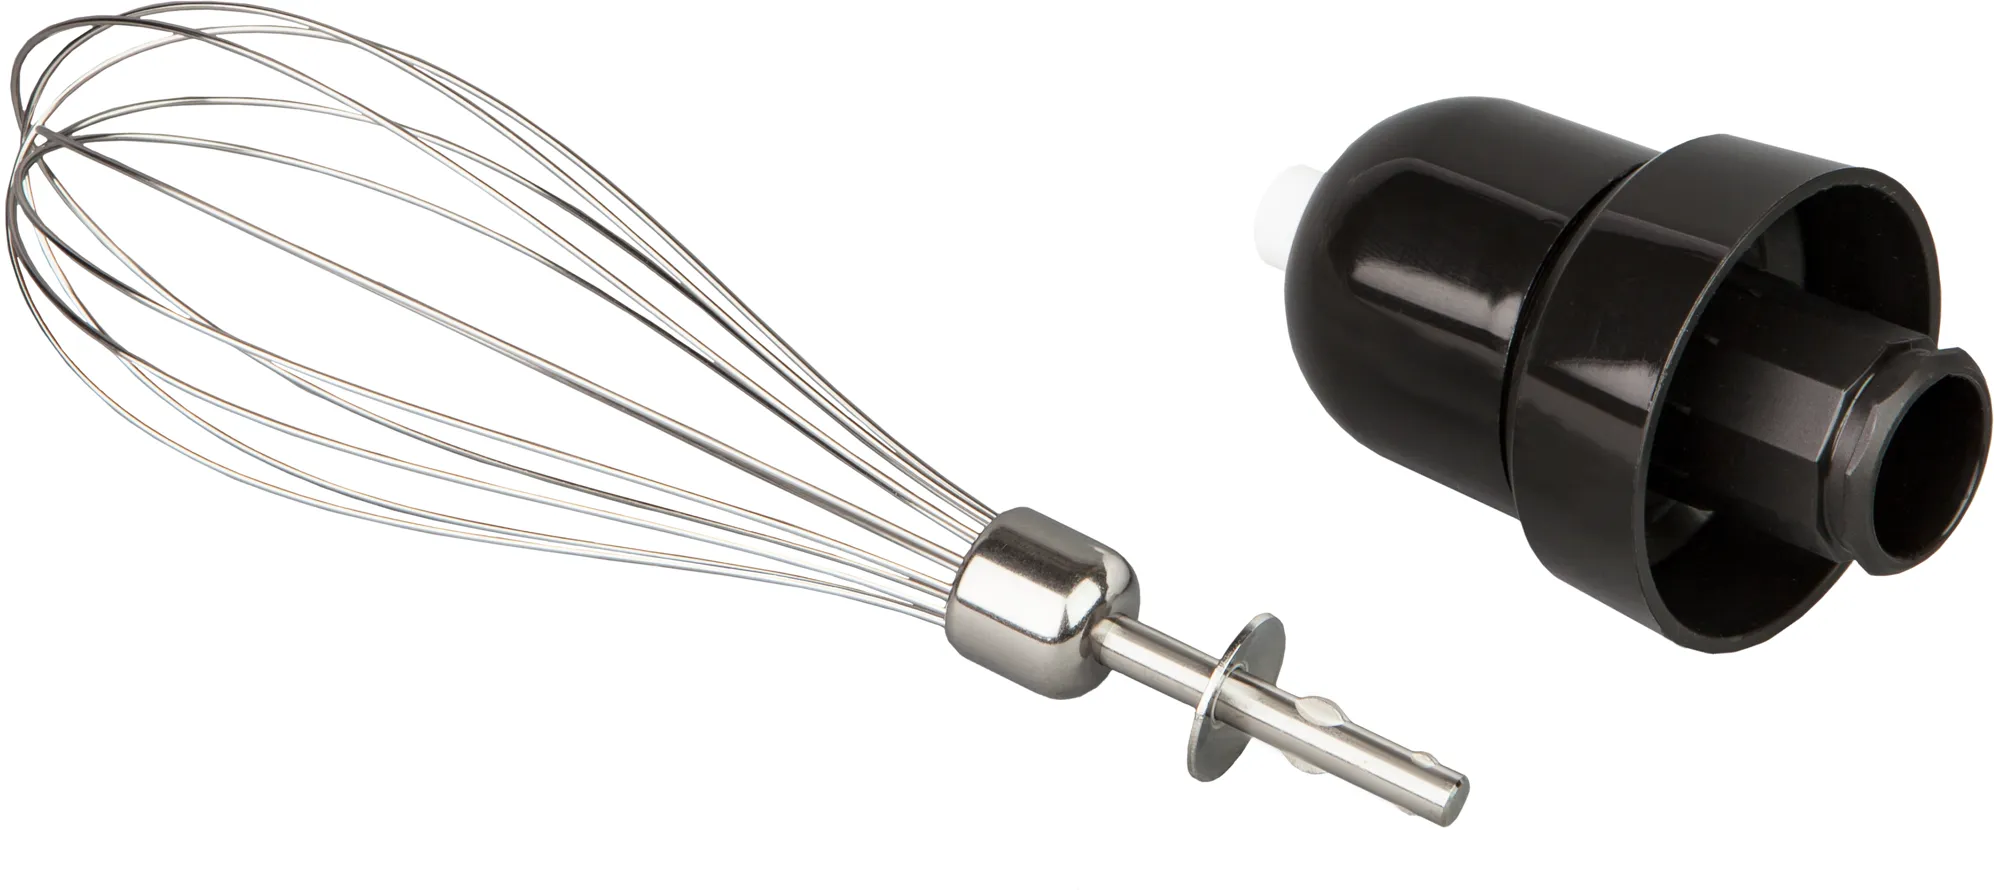 Beater Kit, whisk (5 wires) with gear box, black RAL9005 II Whisk: wires =DIN 17224-X12CrNi77, insert =PP, cap = EN 10088-2-X20Cr13 